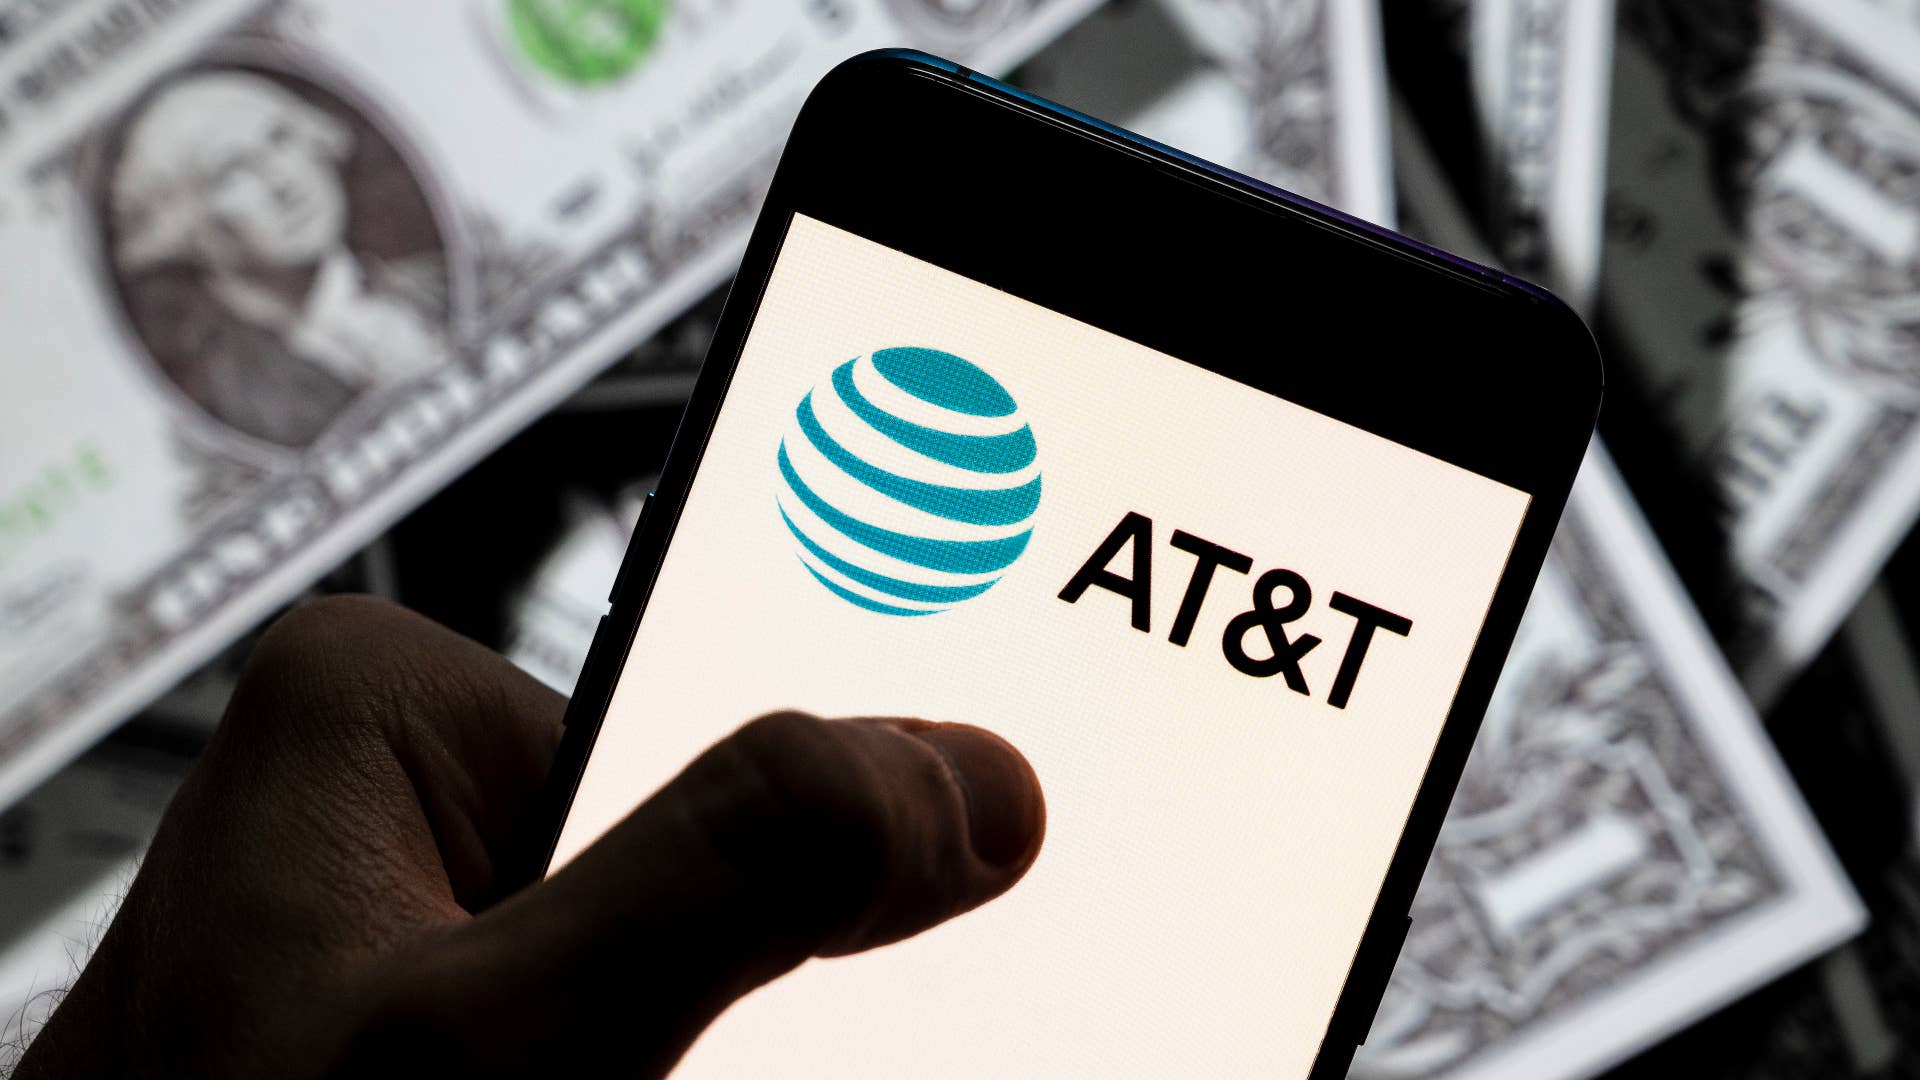 In this photo illustration, an AT&T logo seen displayed on a smartphone with USD (United States dollar) currency in the background.